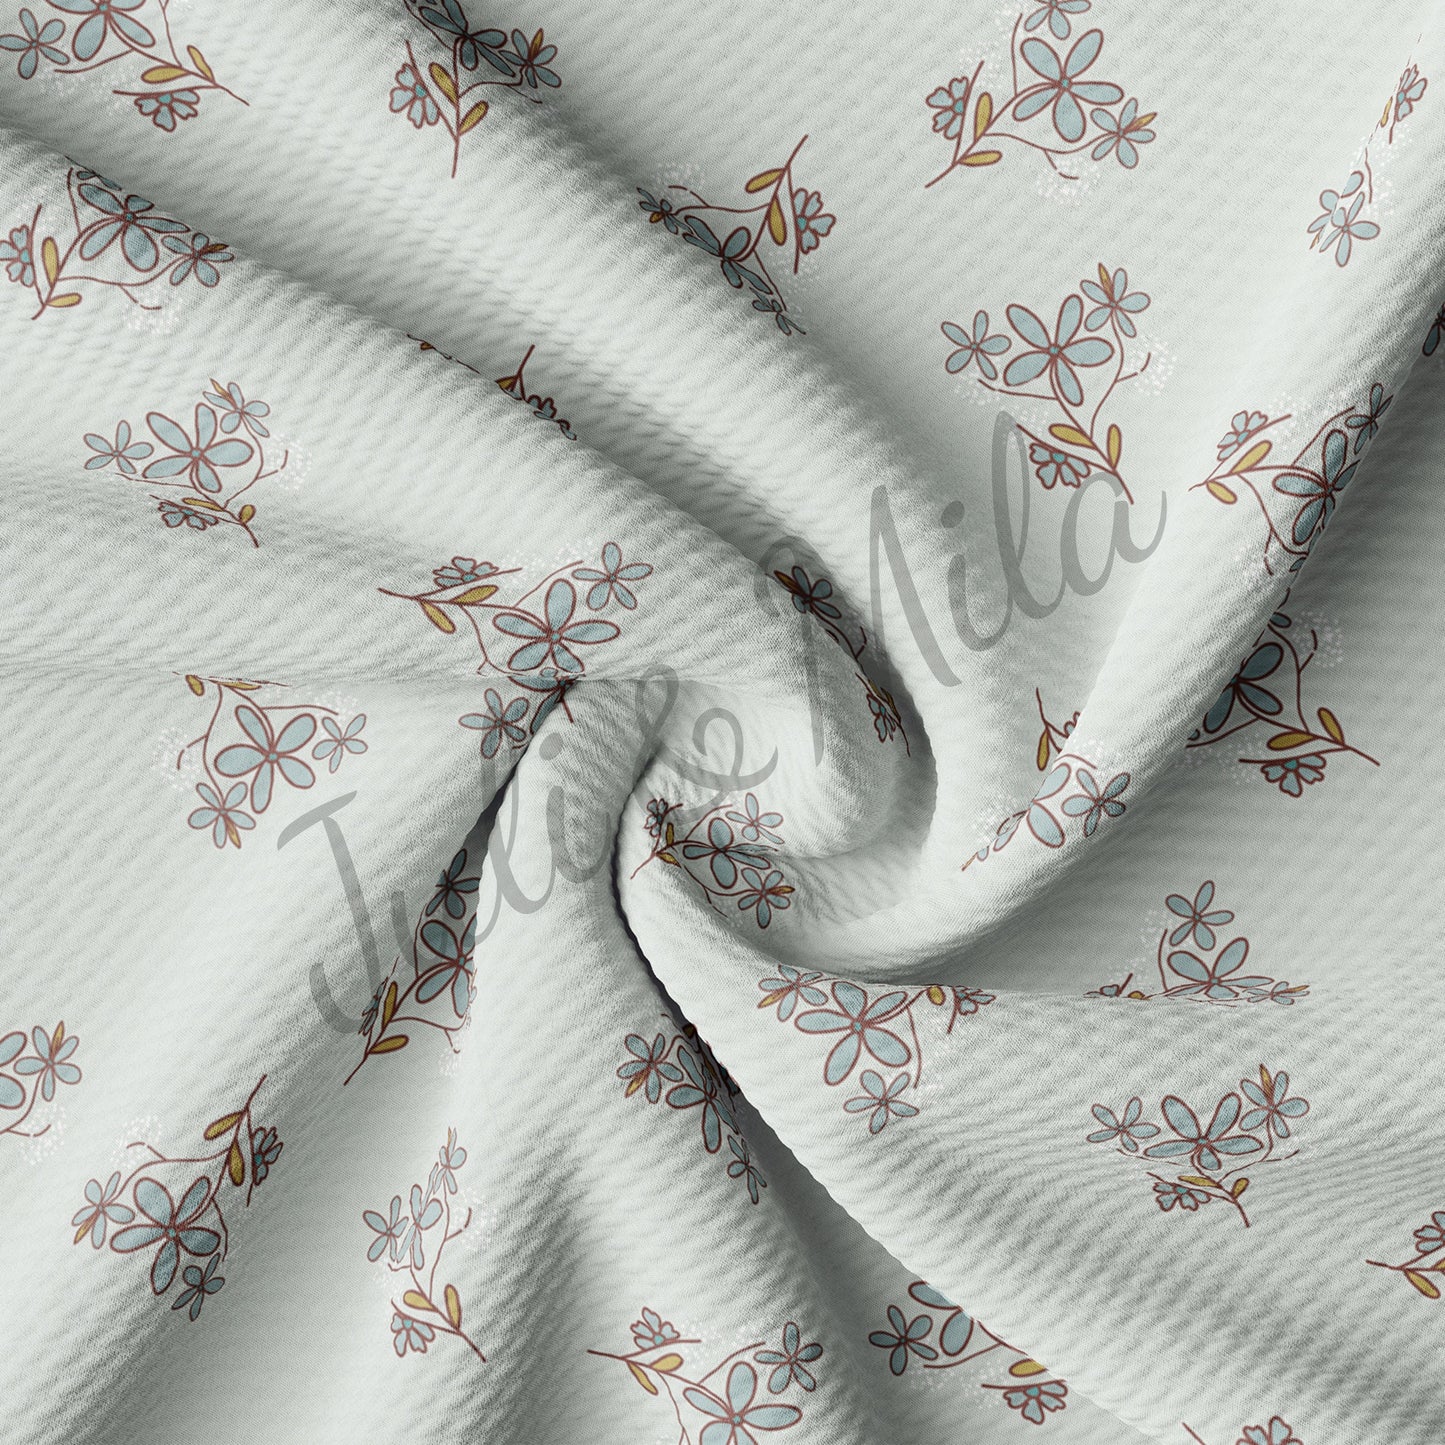 Floral Bullet Textured Fabric Floral68